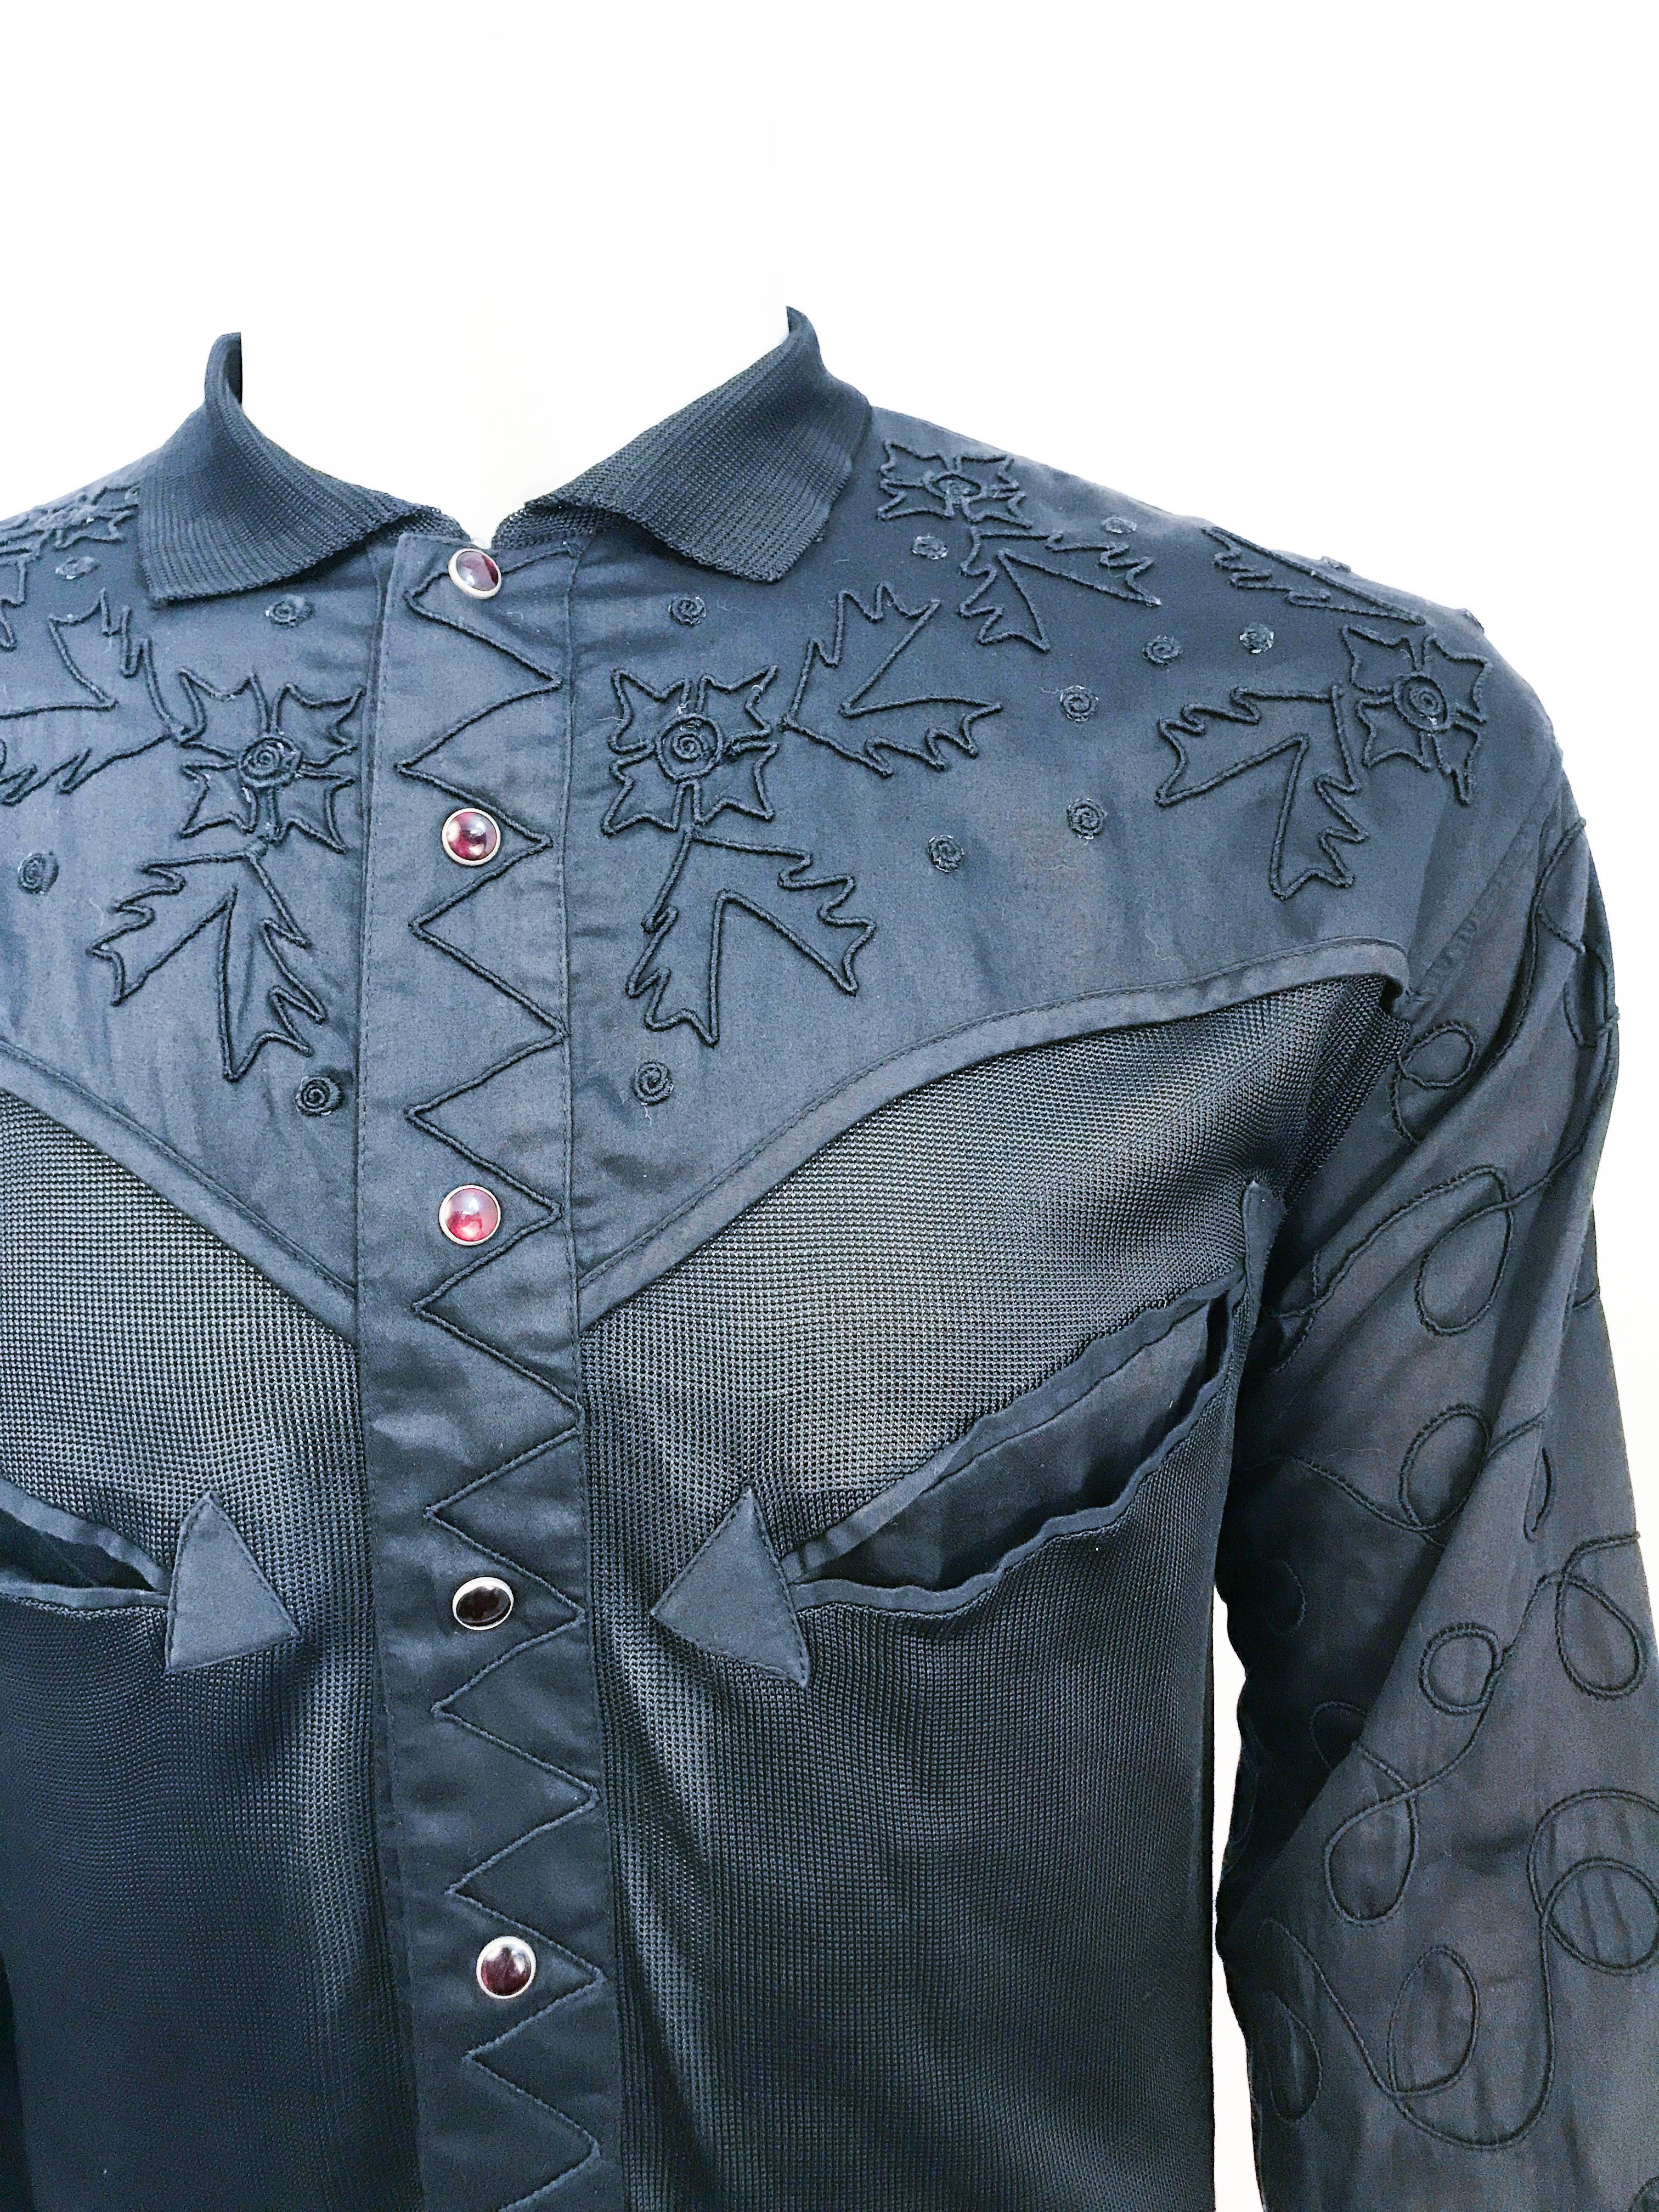 1980s Claude Montana Kintt and Embroidered Western Shirt in Black.